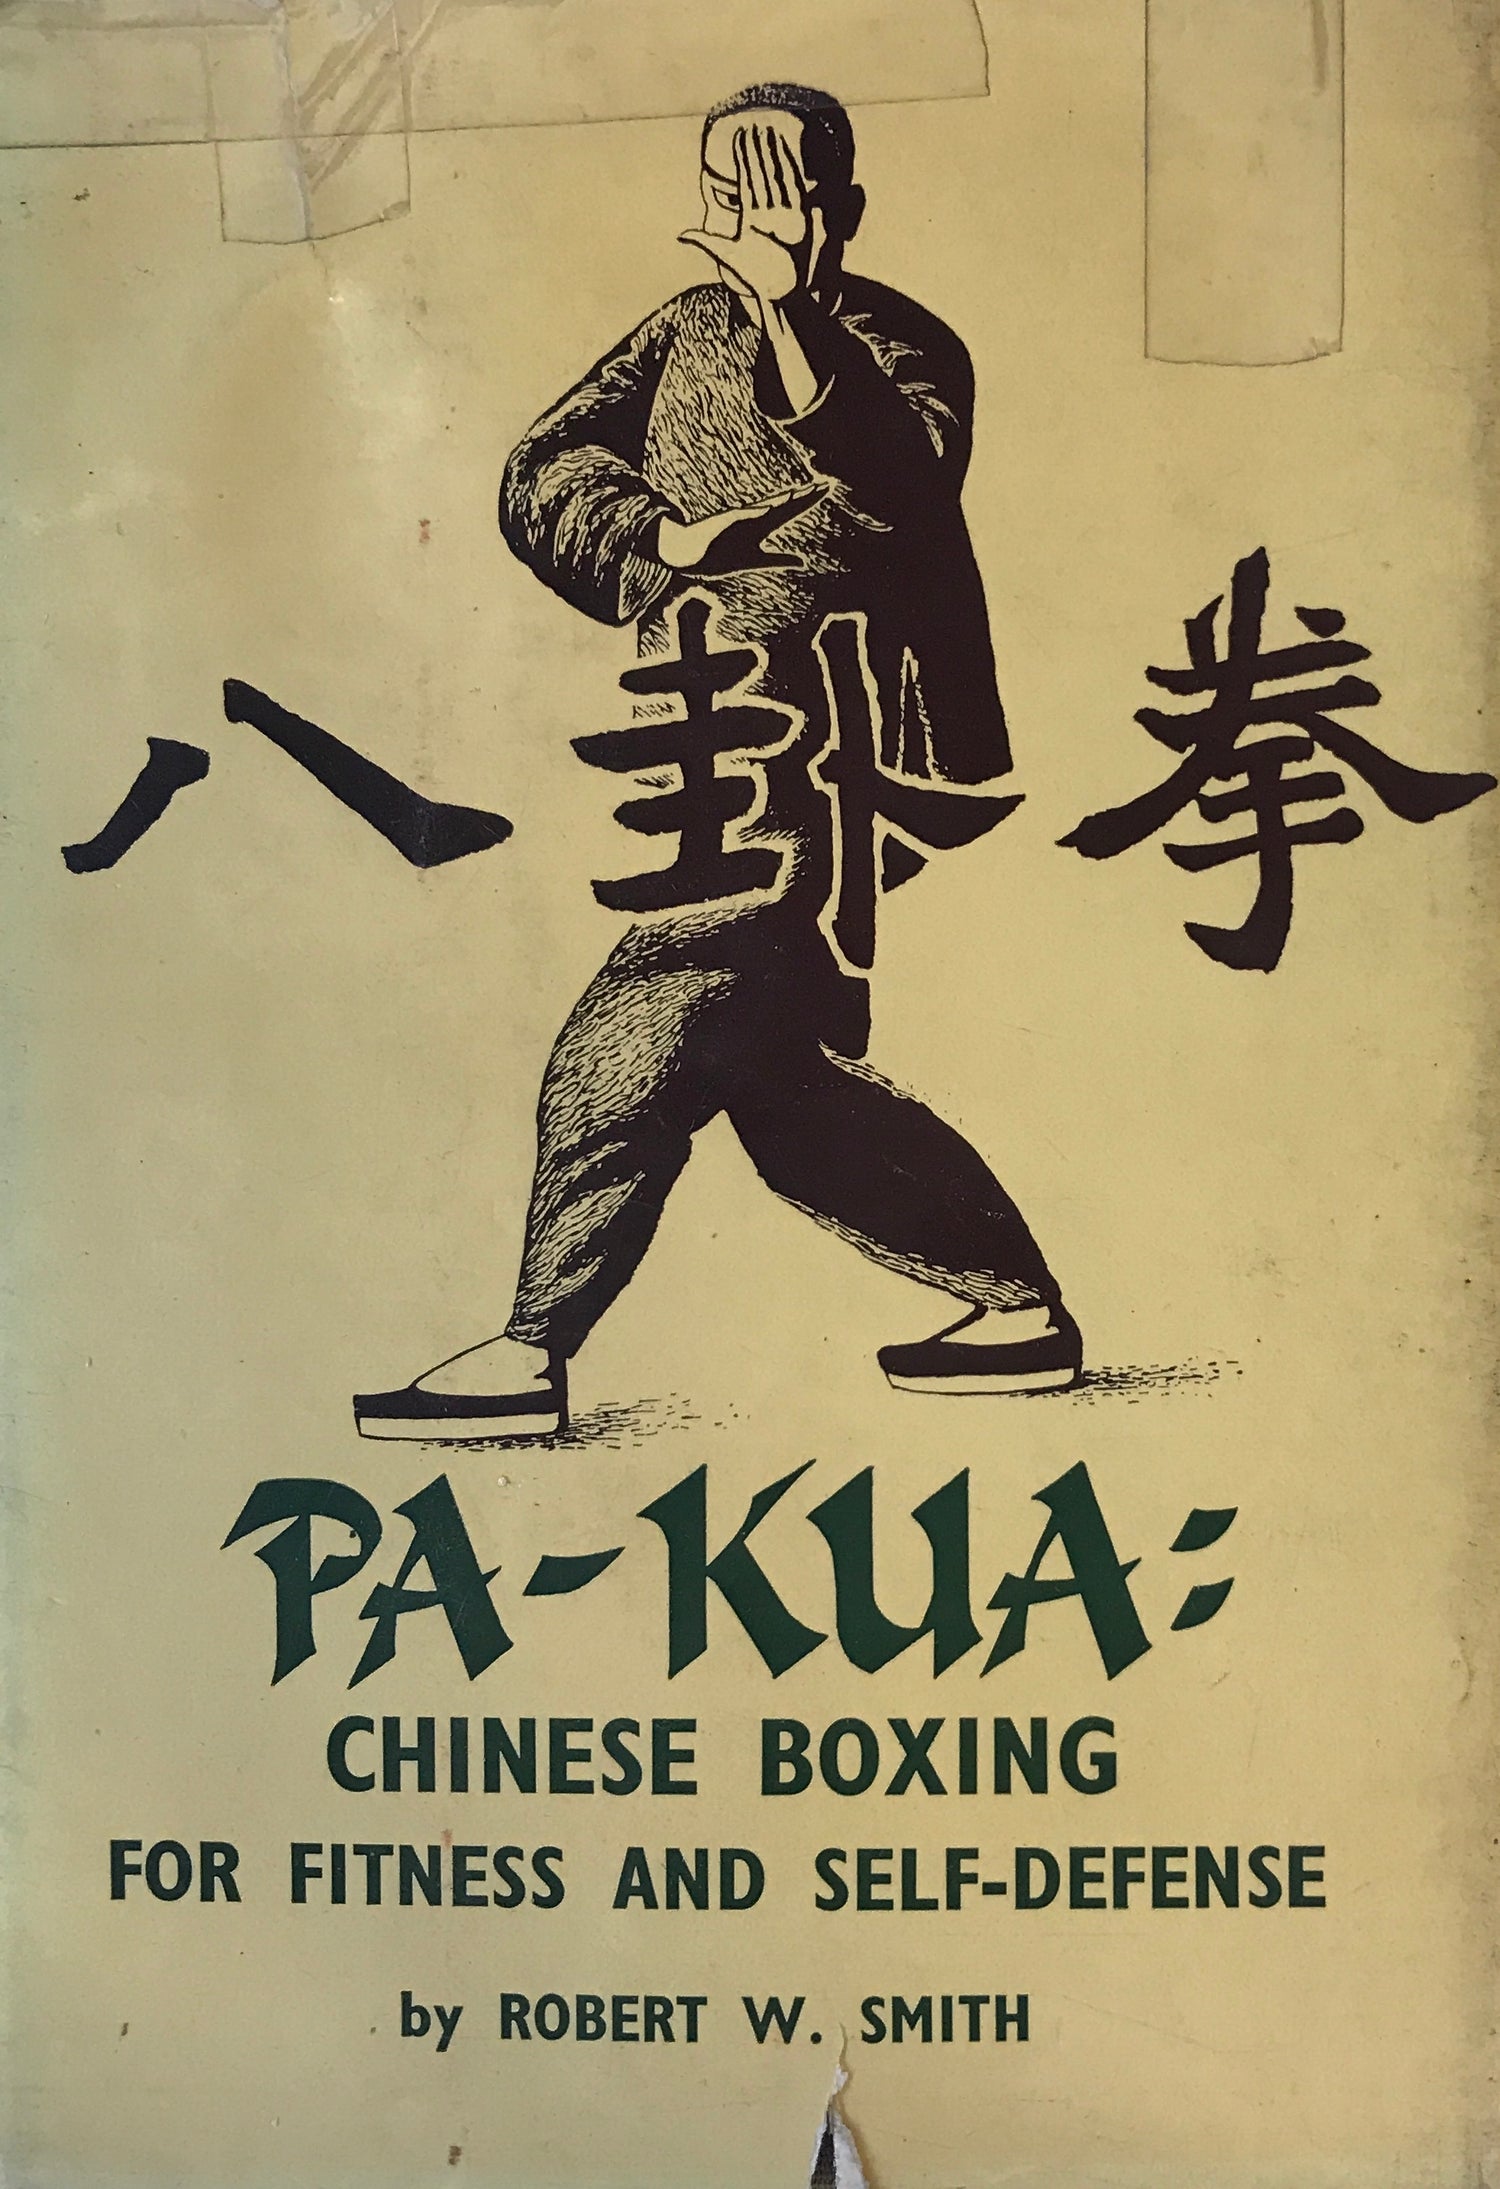 Pa-Kua: Chinese Boxing for Fitness and Self-Defense Book by Robert Smith (Hardcover) (Preowned) - Budovideos Inc